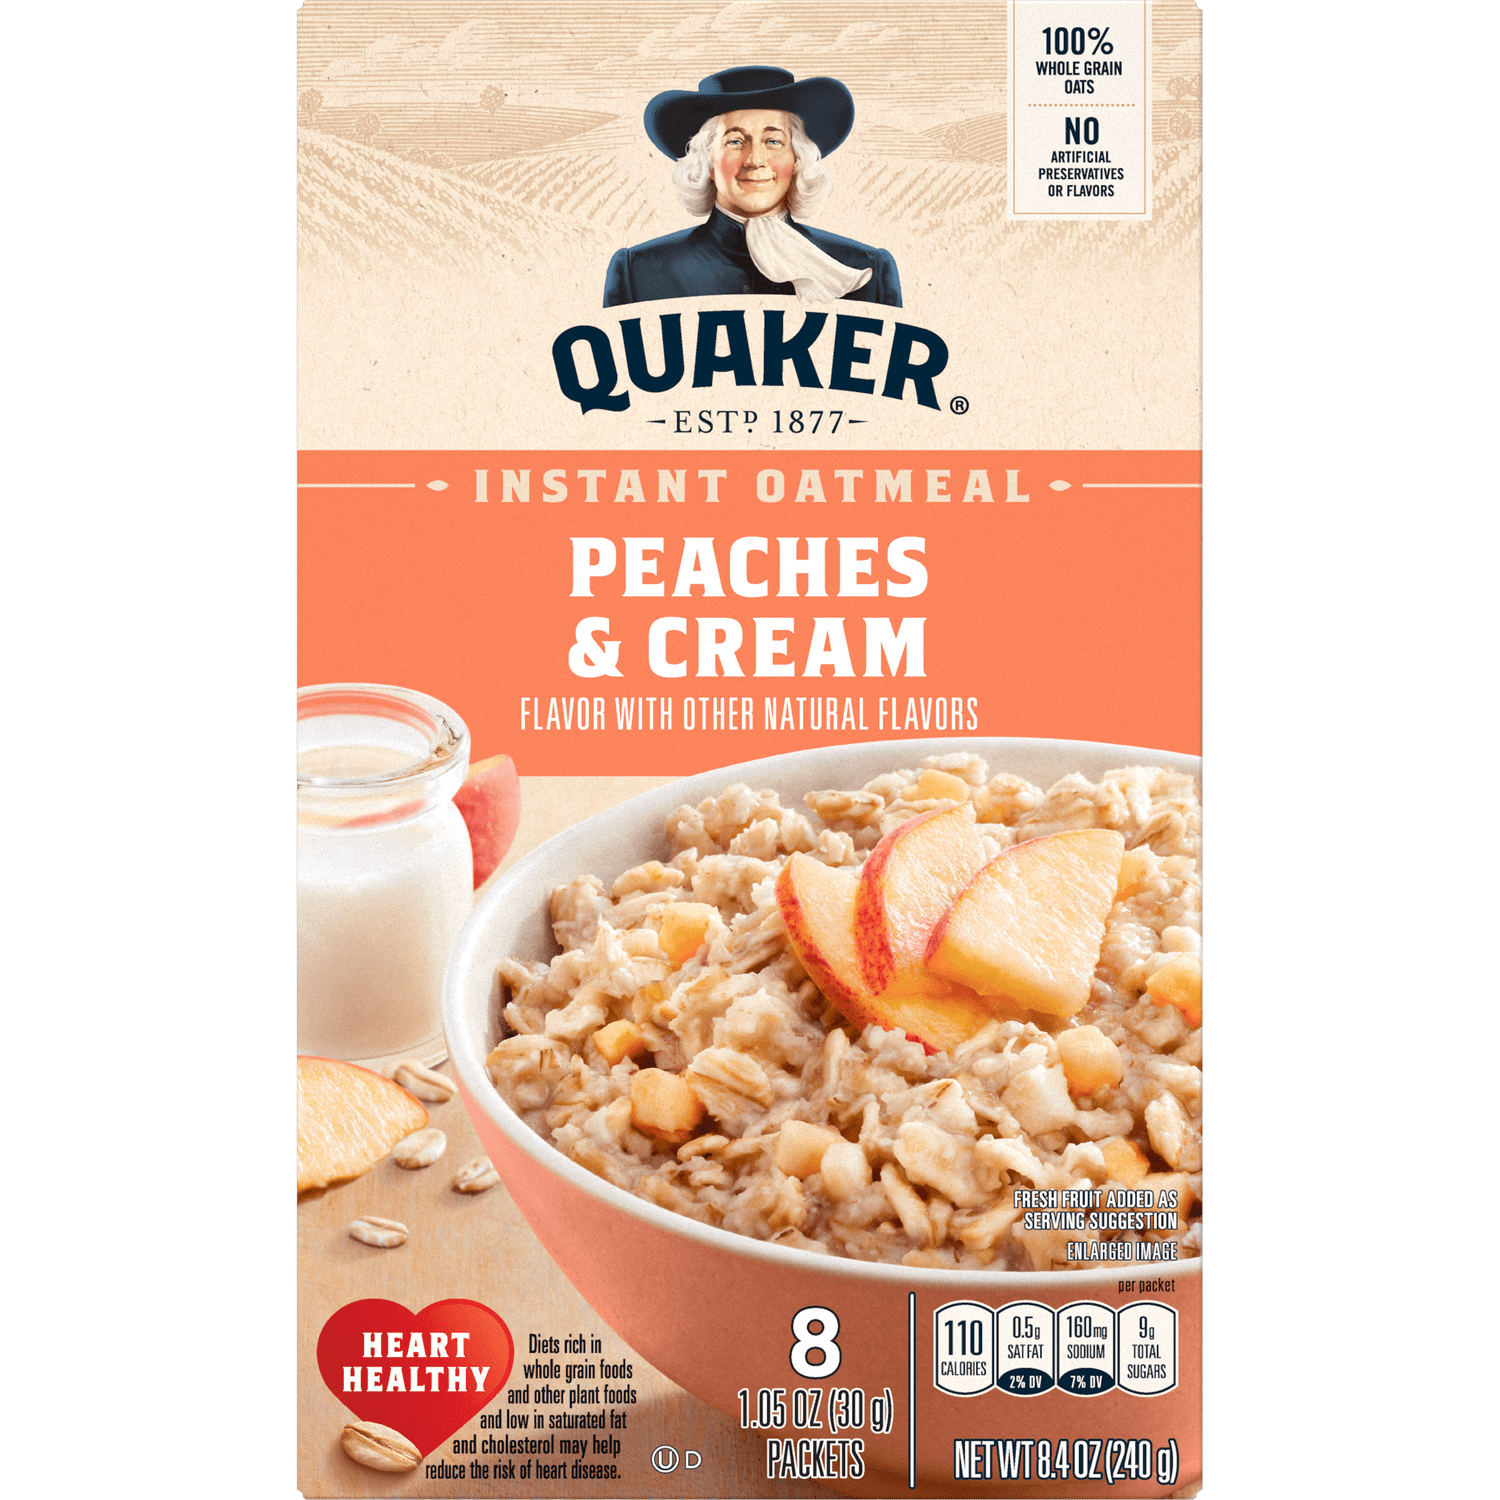 Quaker® Instant Oatmeal - Peaches and Cream package (back view)